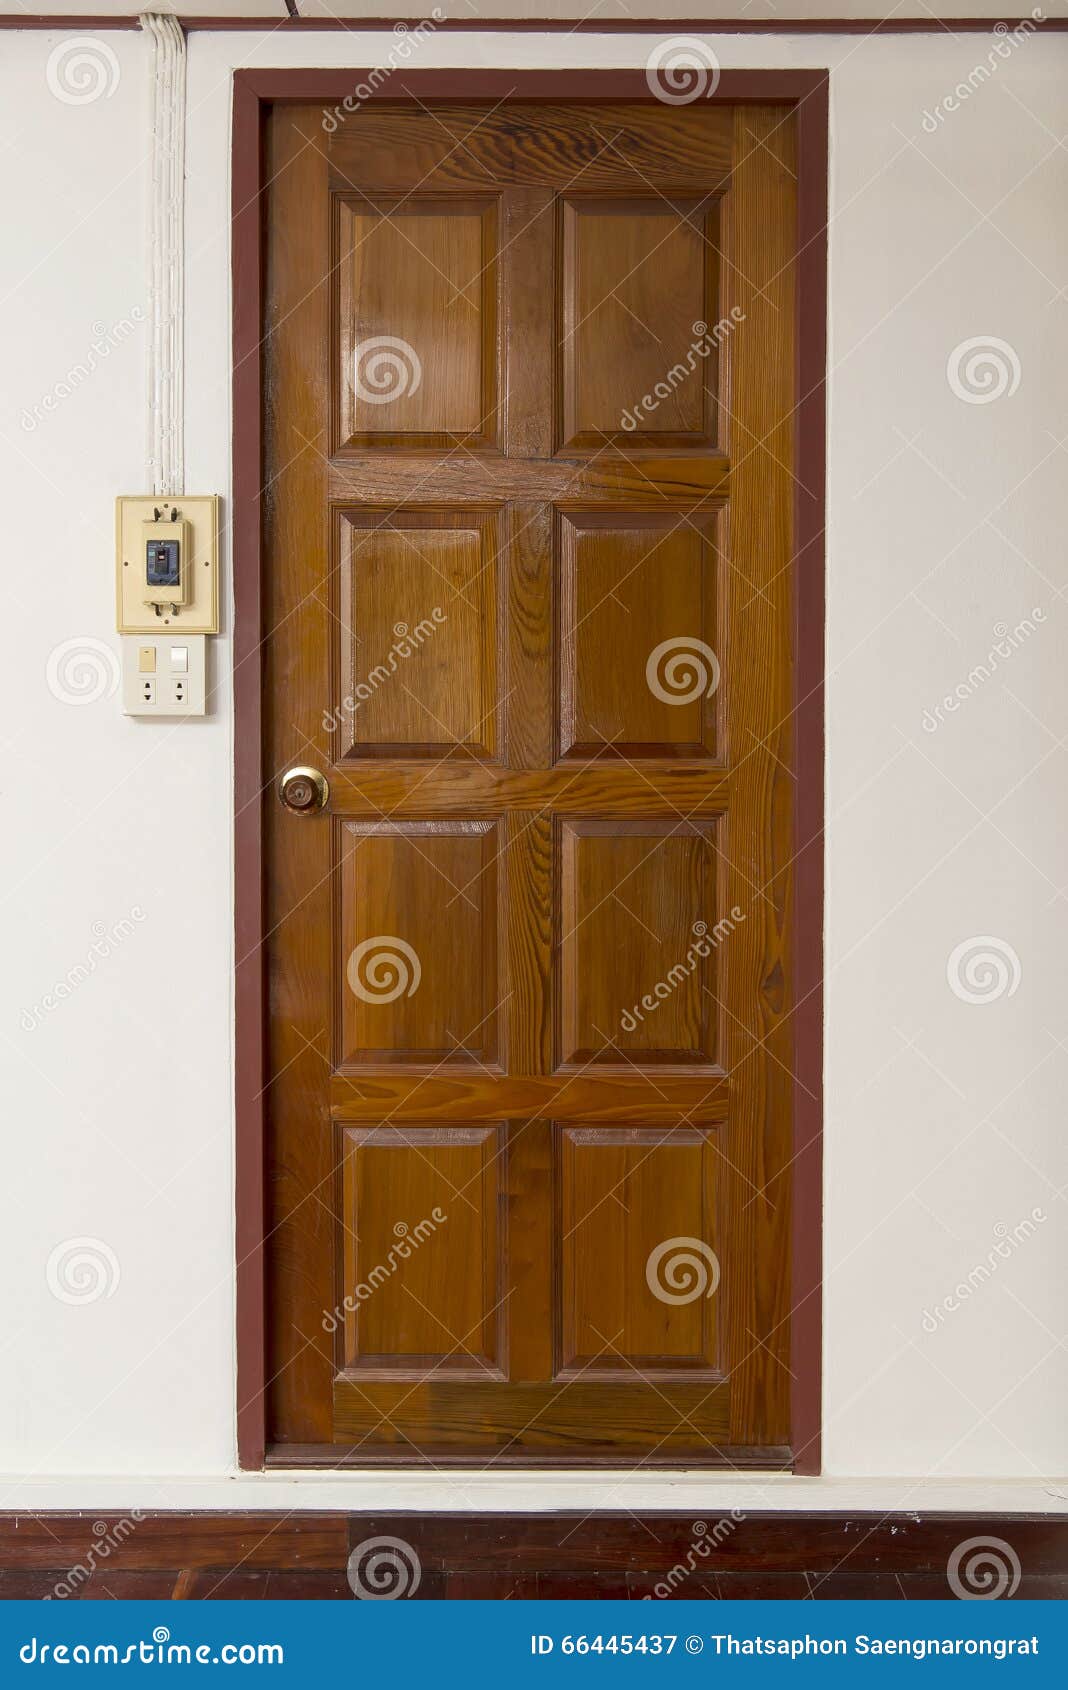 Grunge Brown Wood Door With Wood Frame And Wall Stock Image